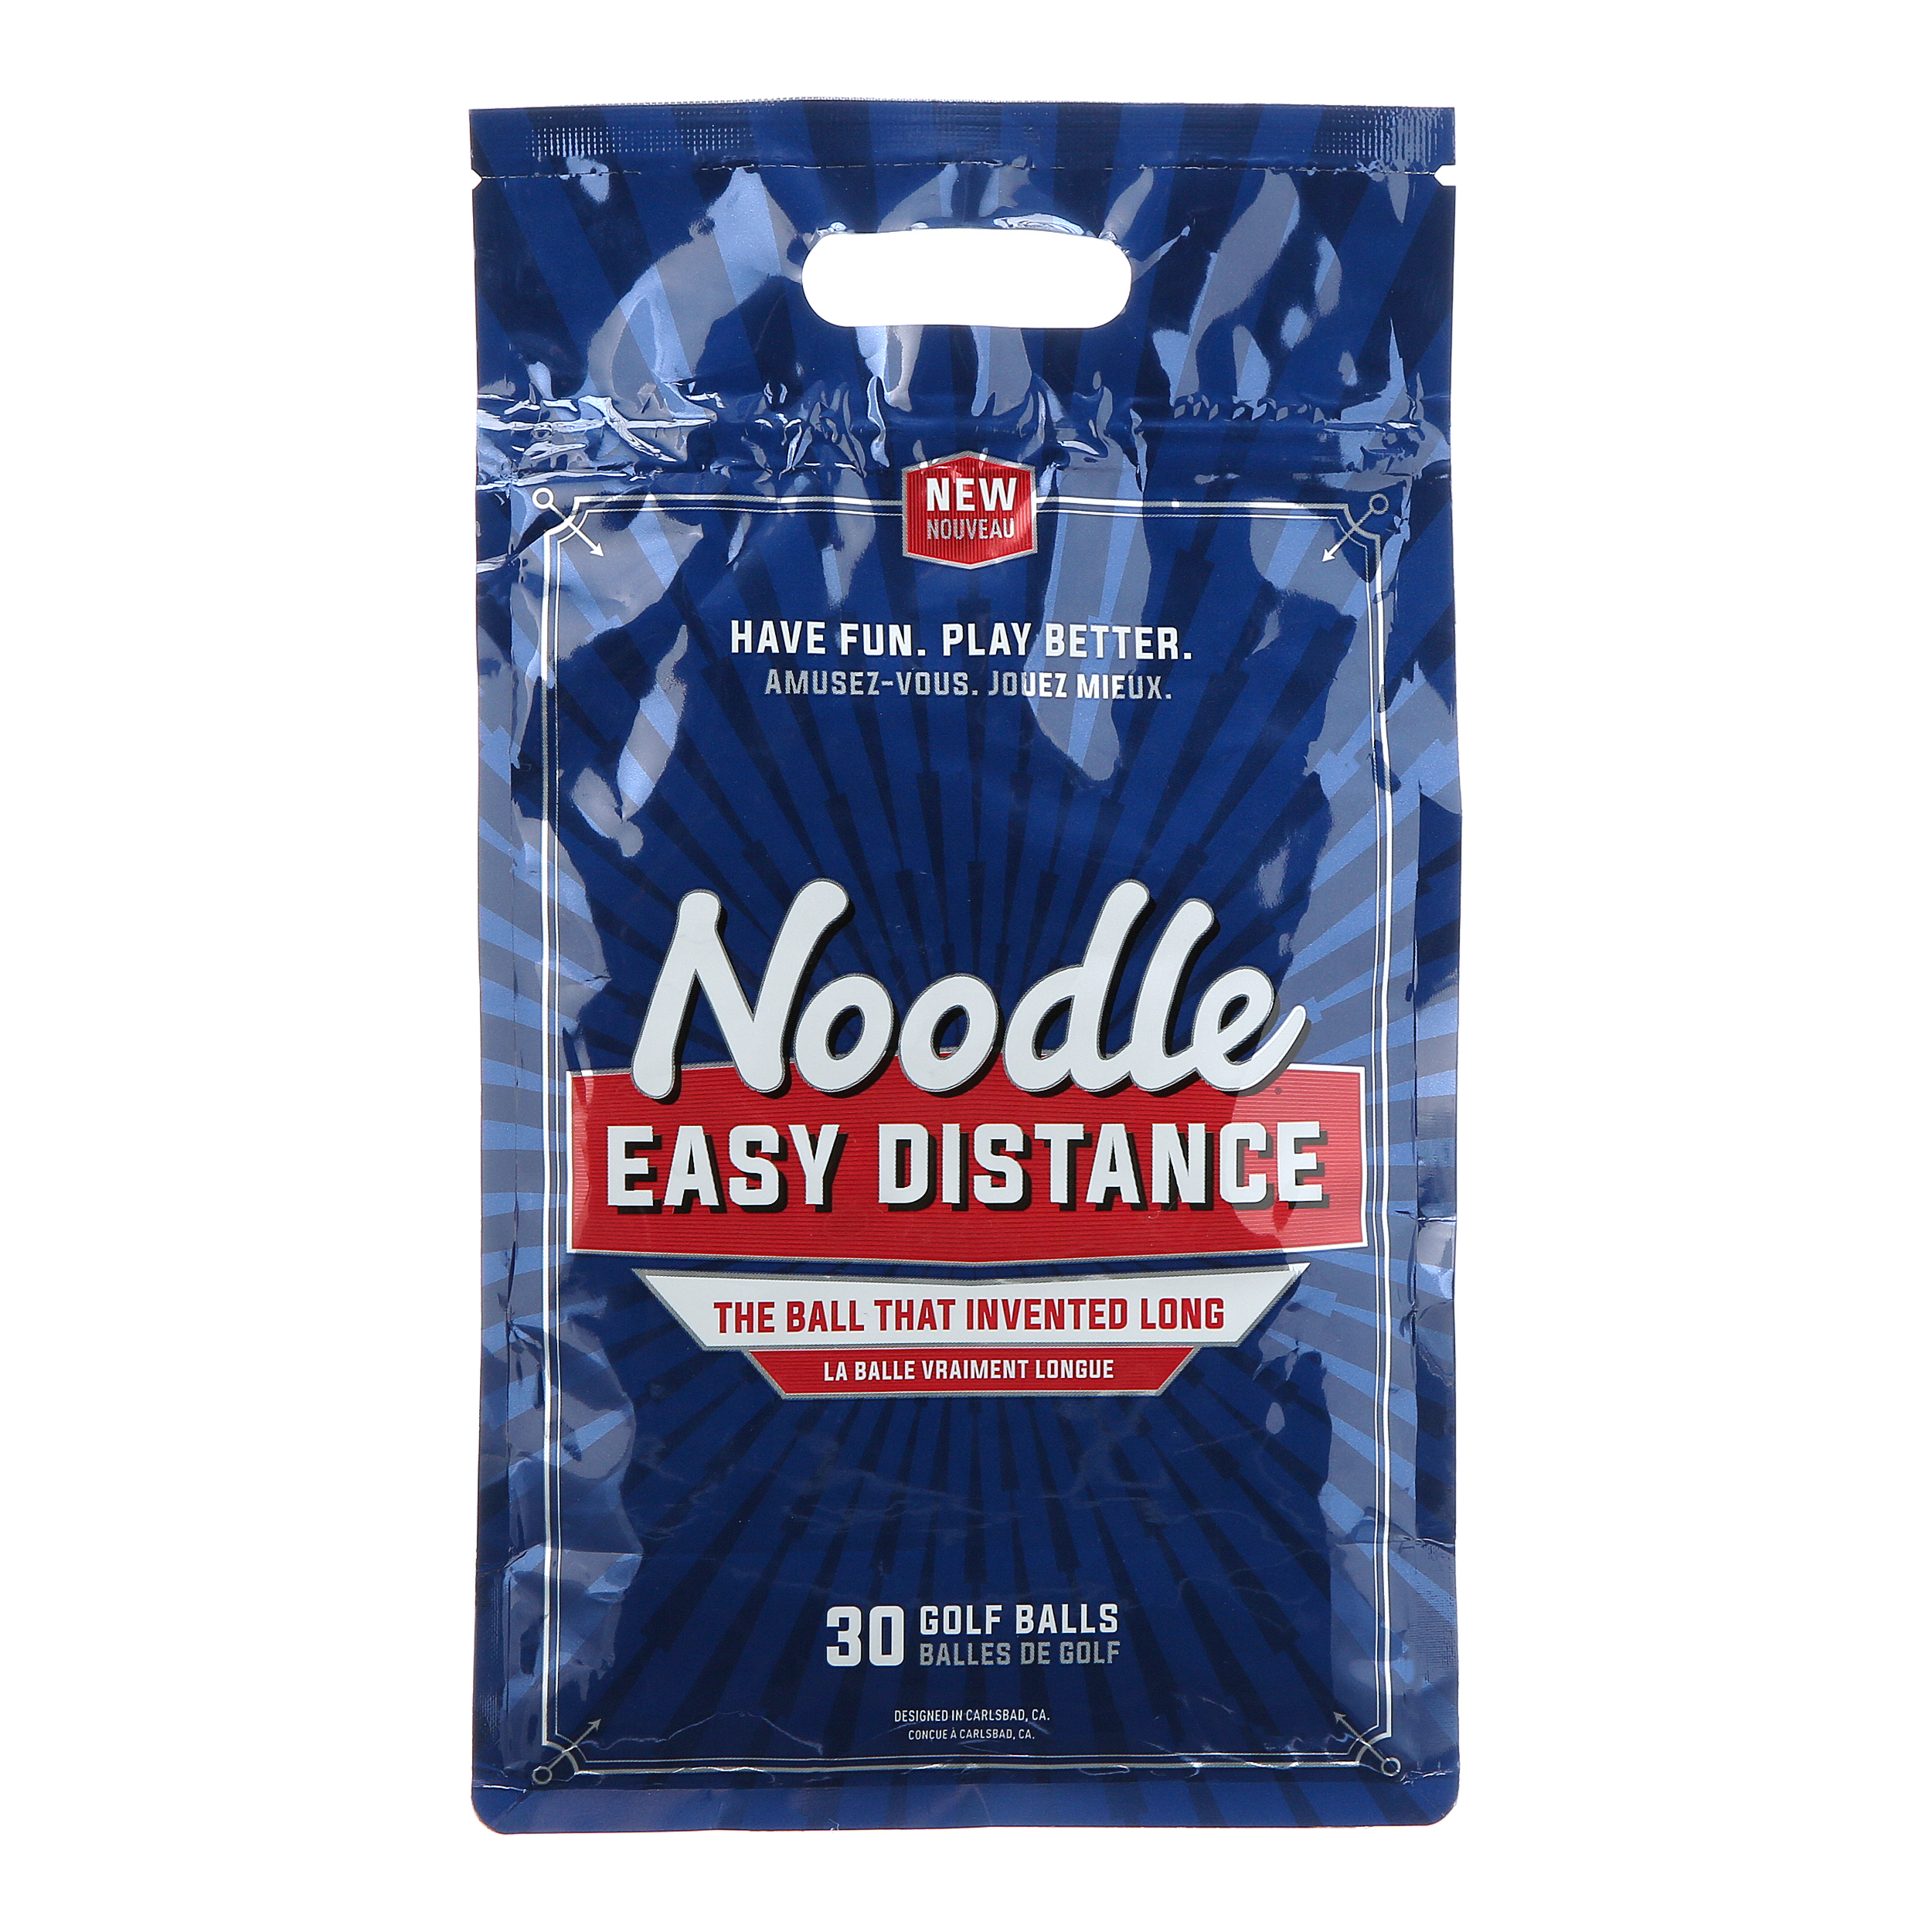 TaylorMade Noodle Easy Distance Golf Balls, 30 Pack - image 1 of 5